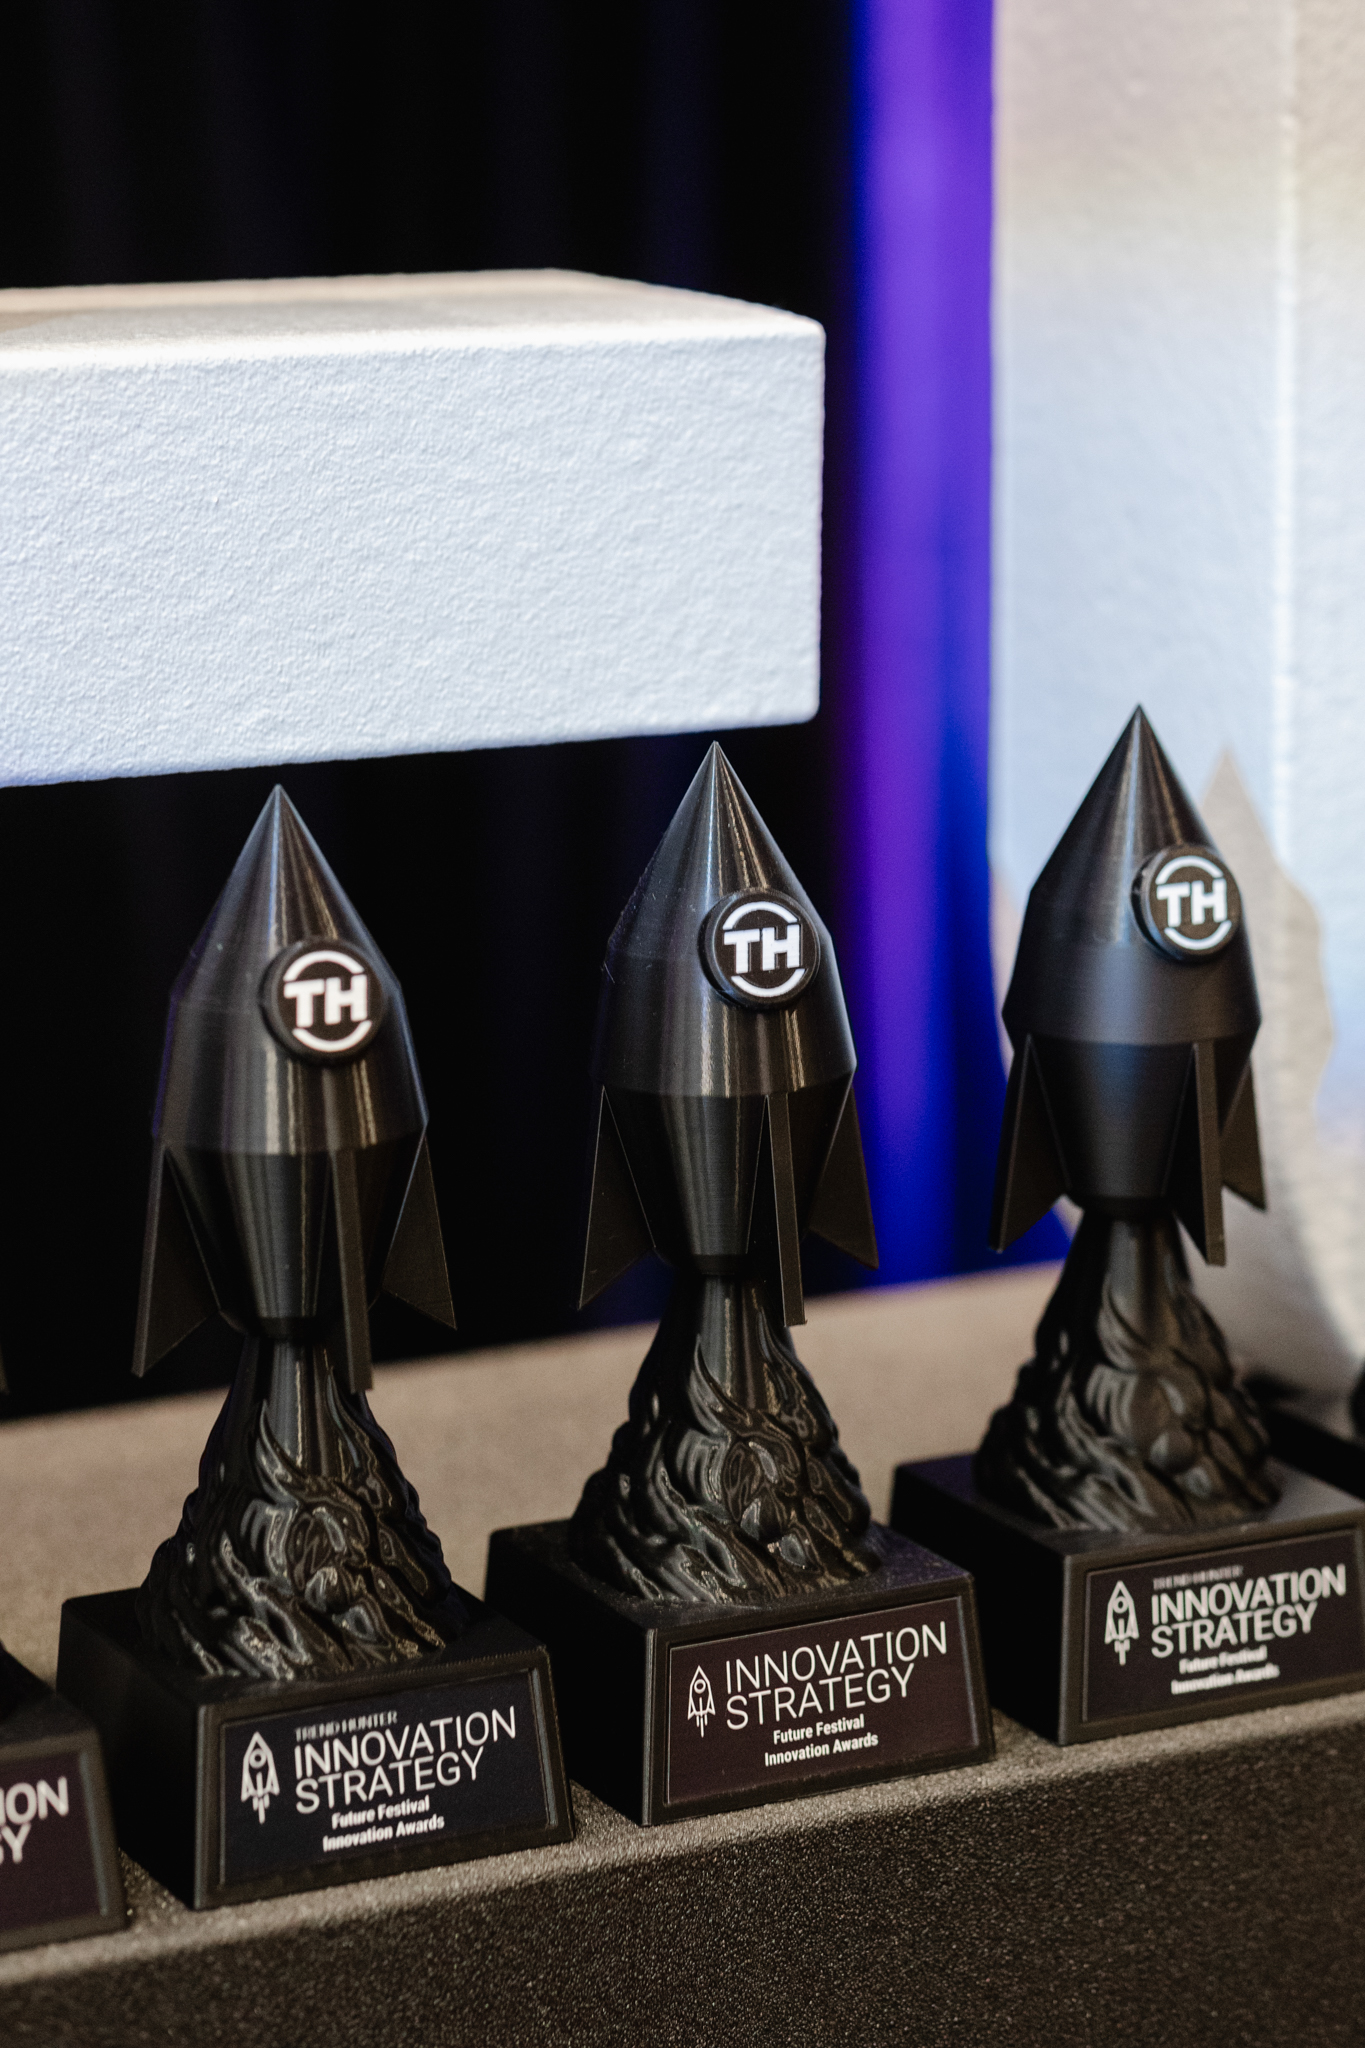 Four black trophies displayed on a table during an event.